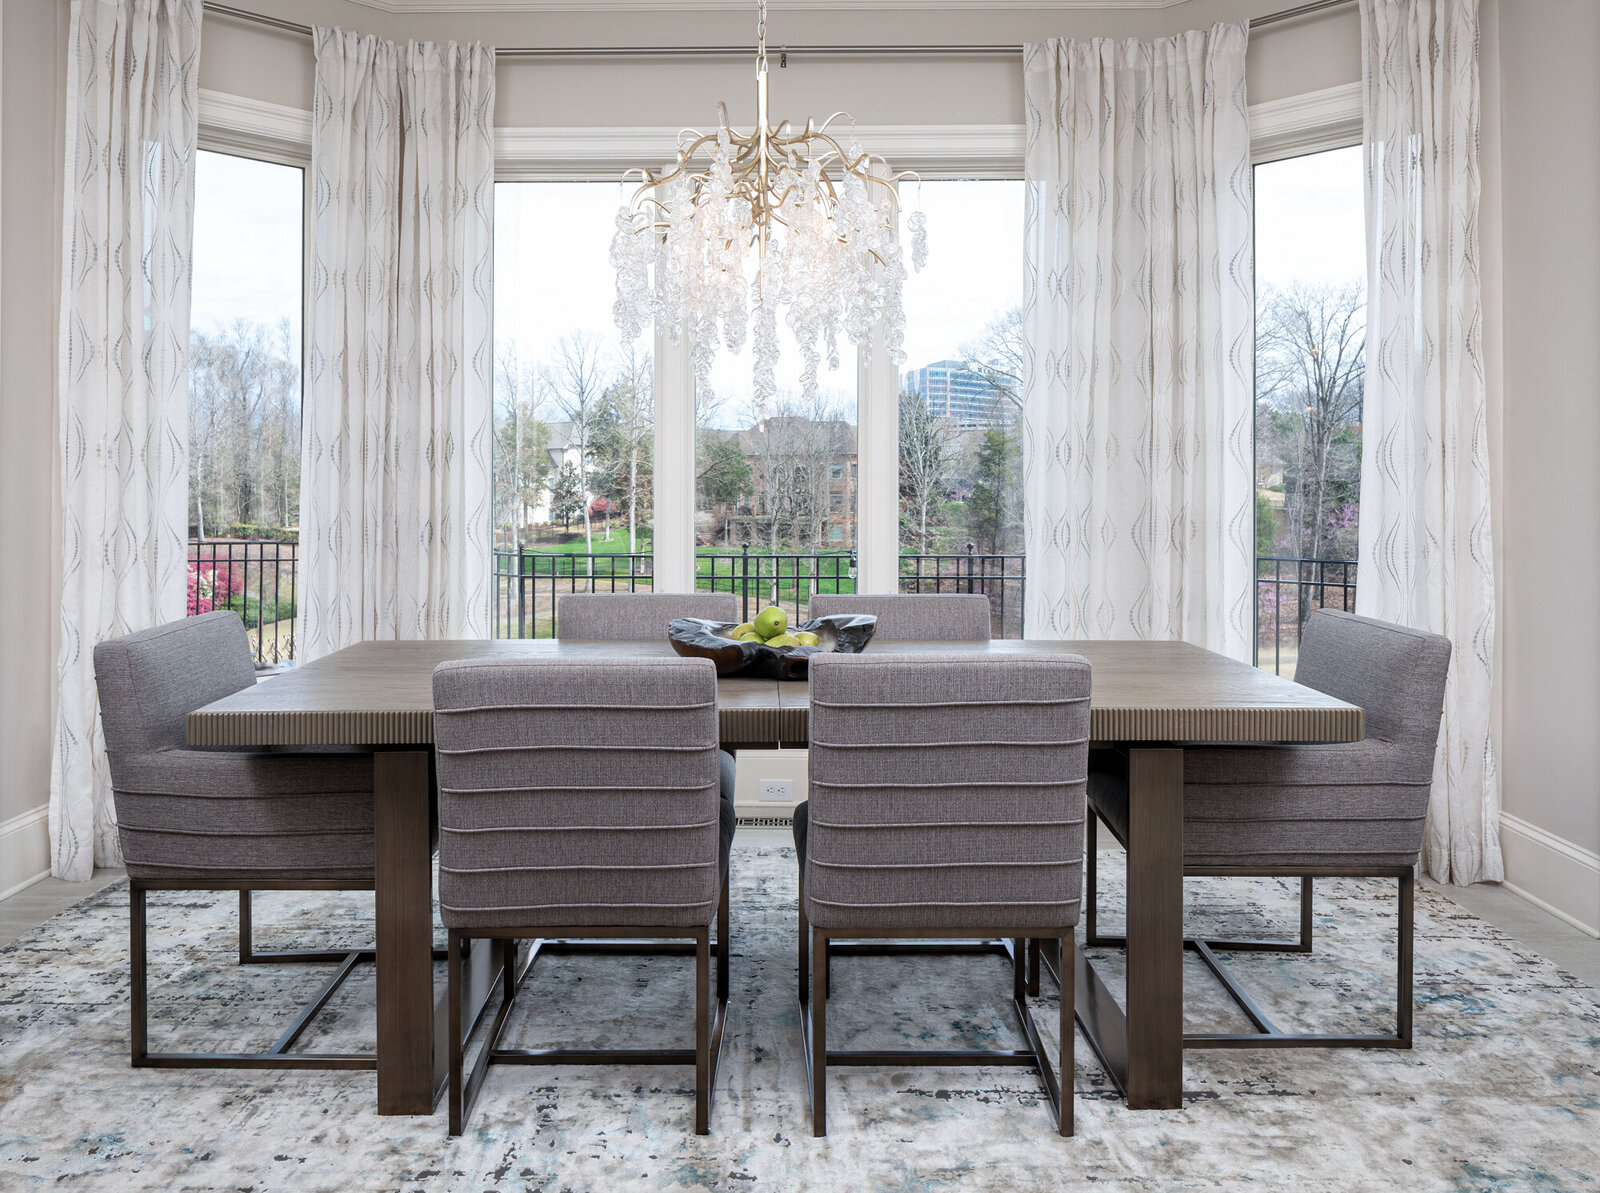 Luxury residential dining room design featuring Universal Furniture. Design by Gracious Home Interiors. Transitional dining room design.